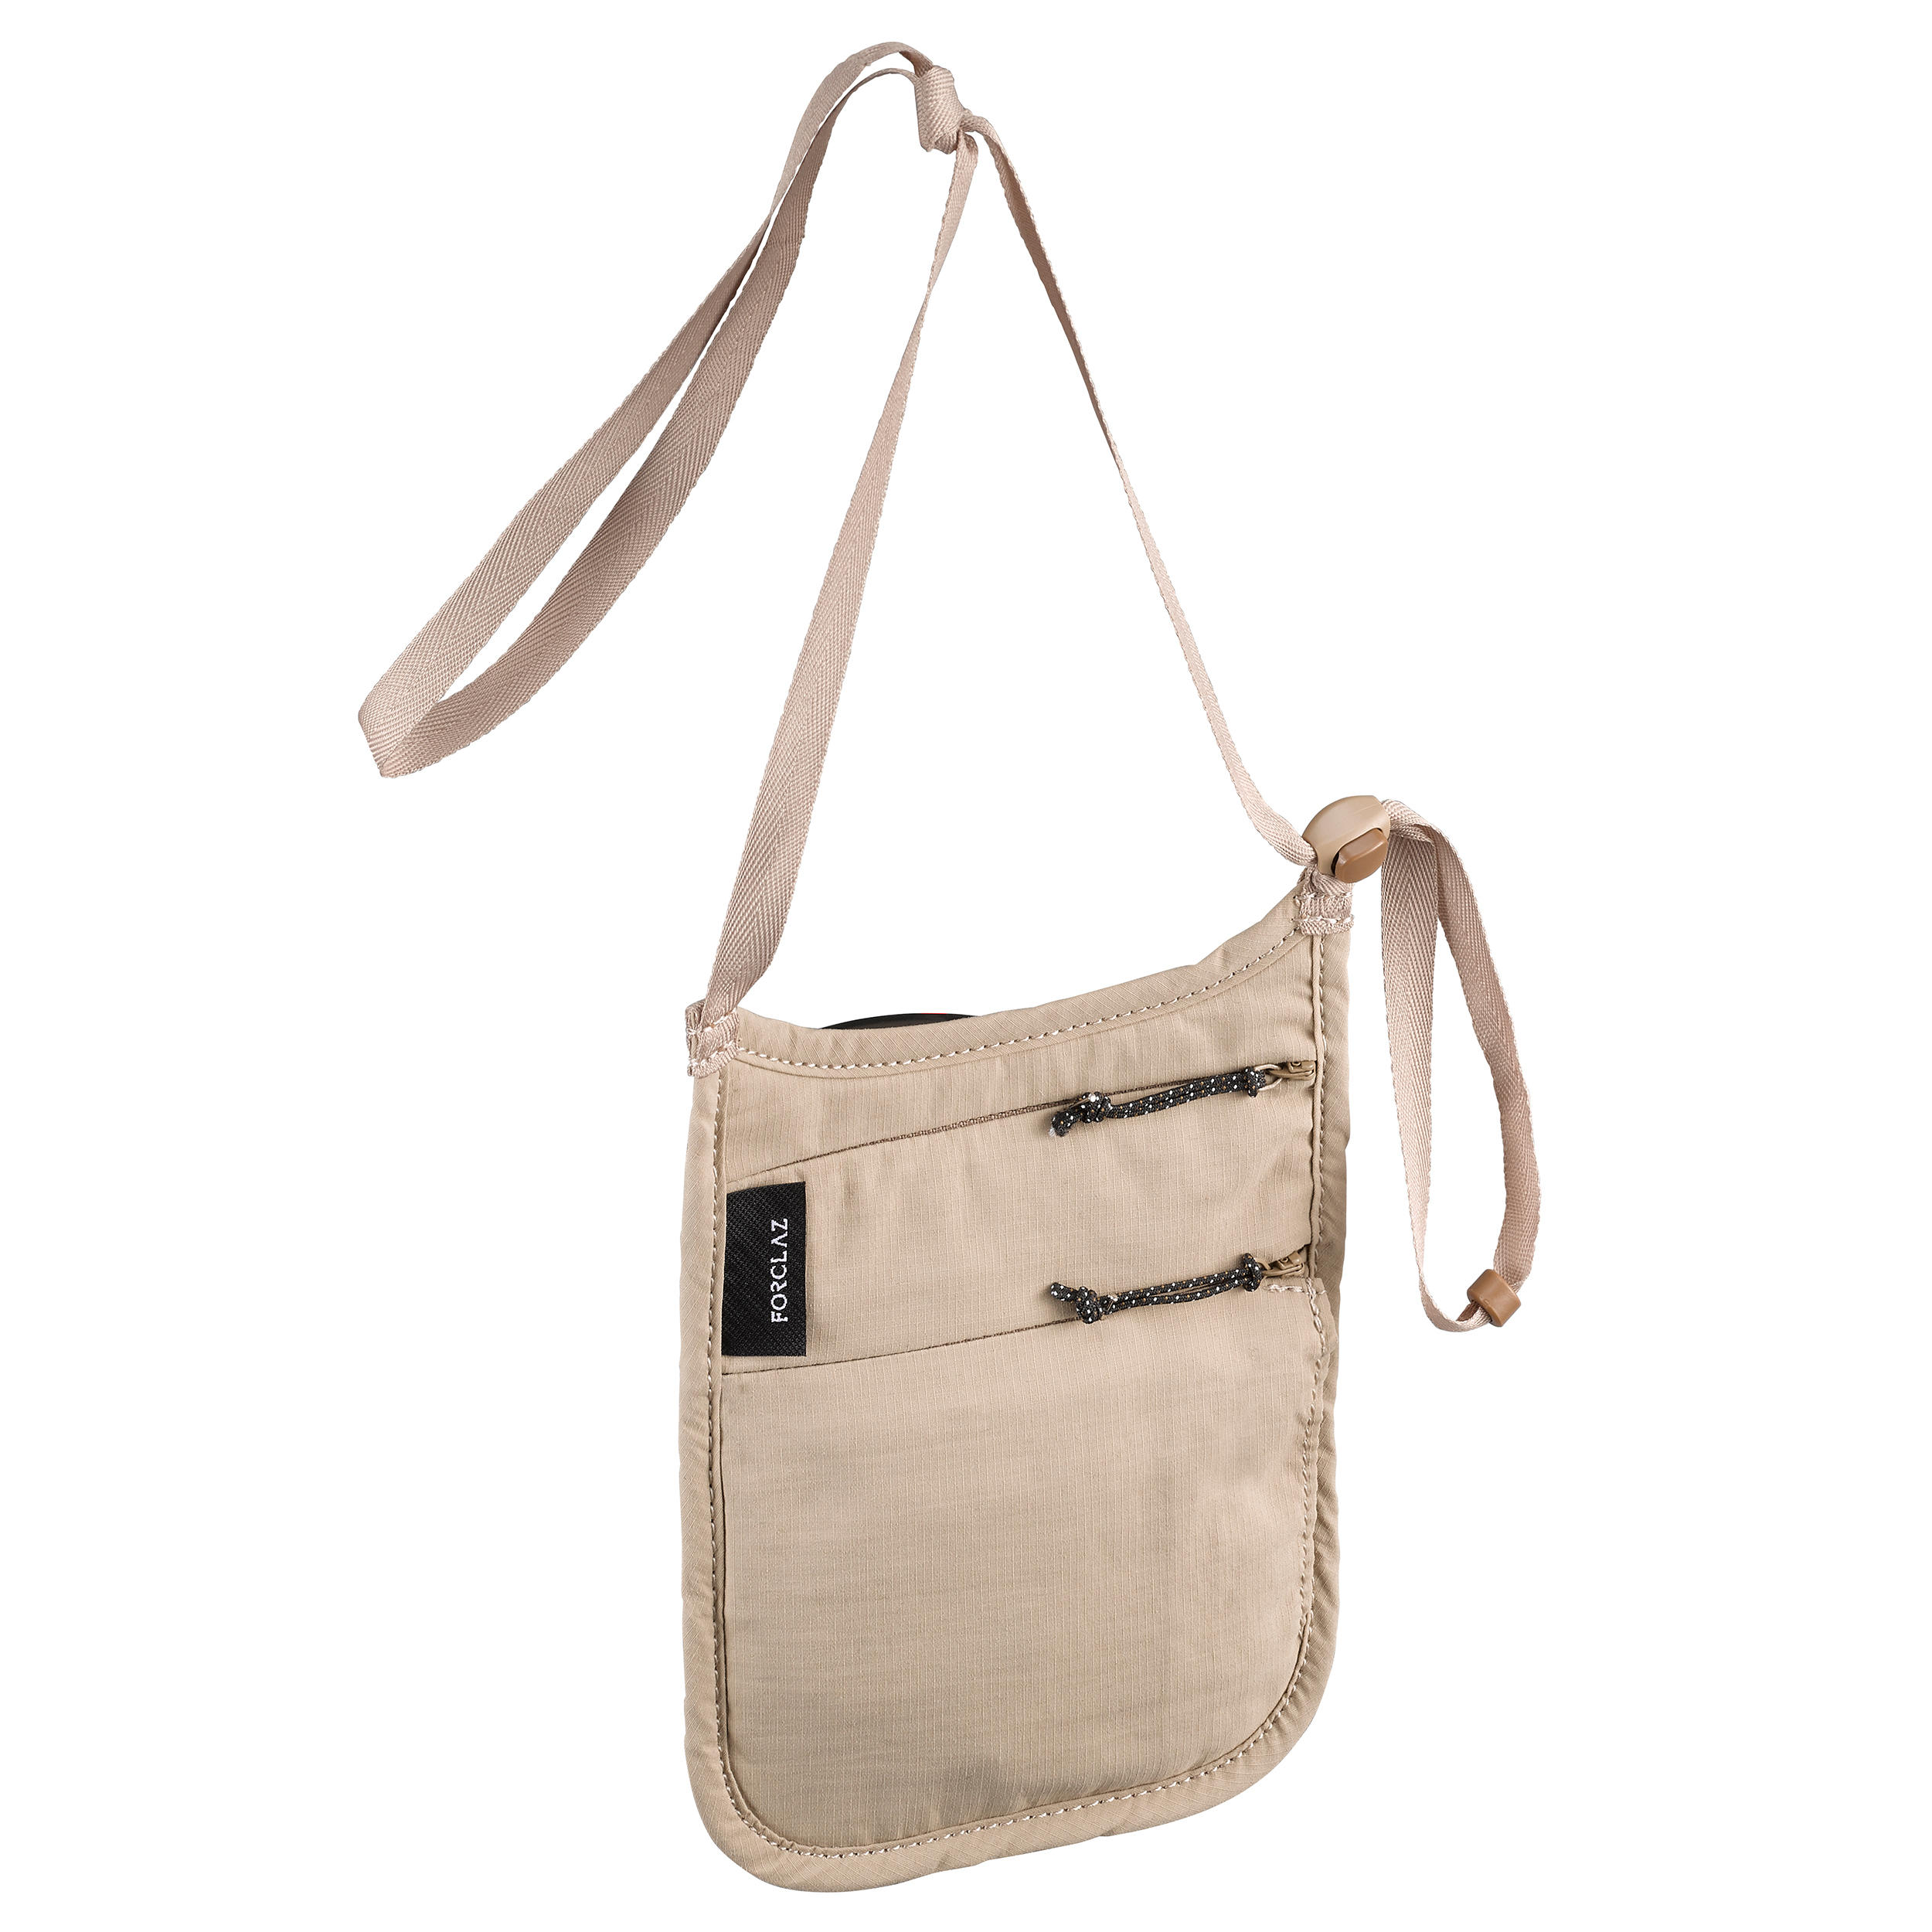 Security Neck Pouch Travel - Beige